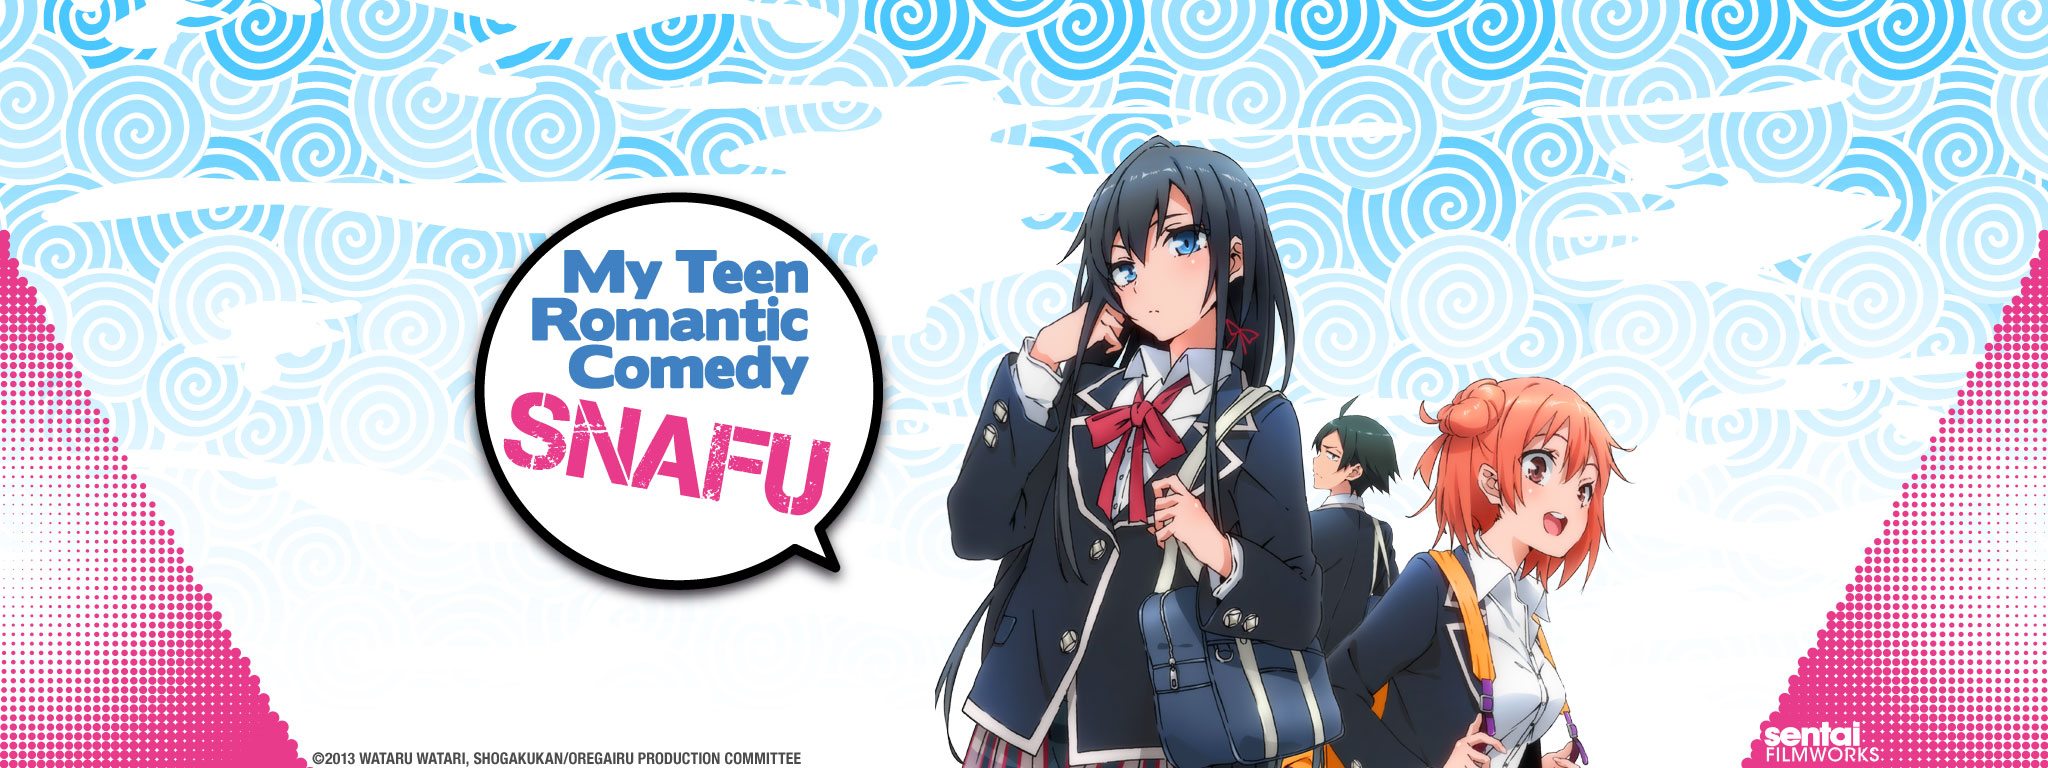 Title Art for My Teen Romantic Comedy SNAFU